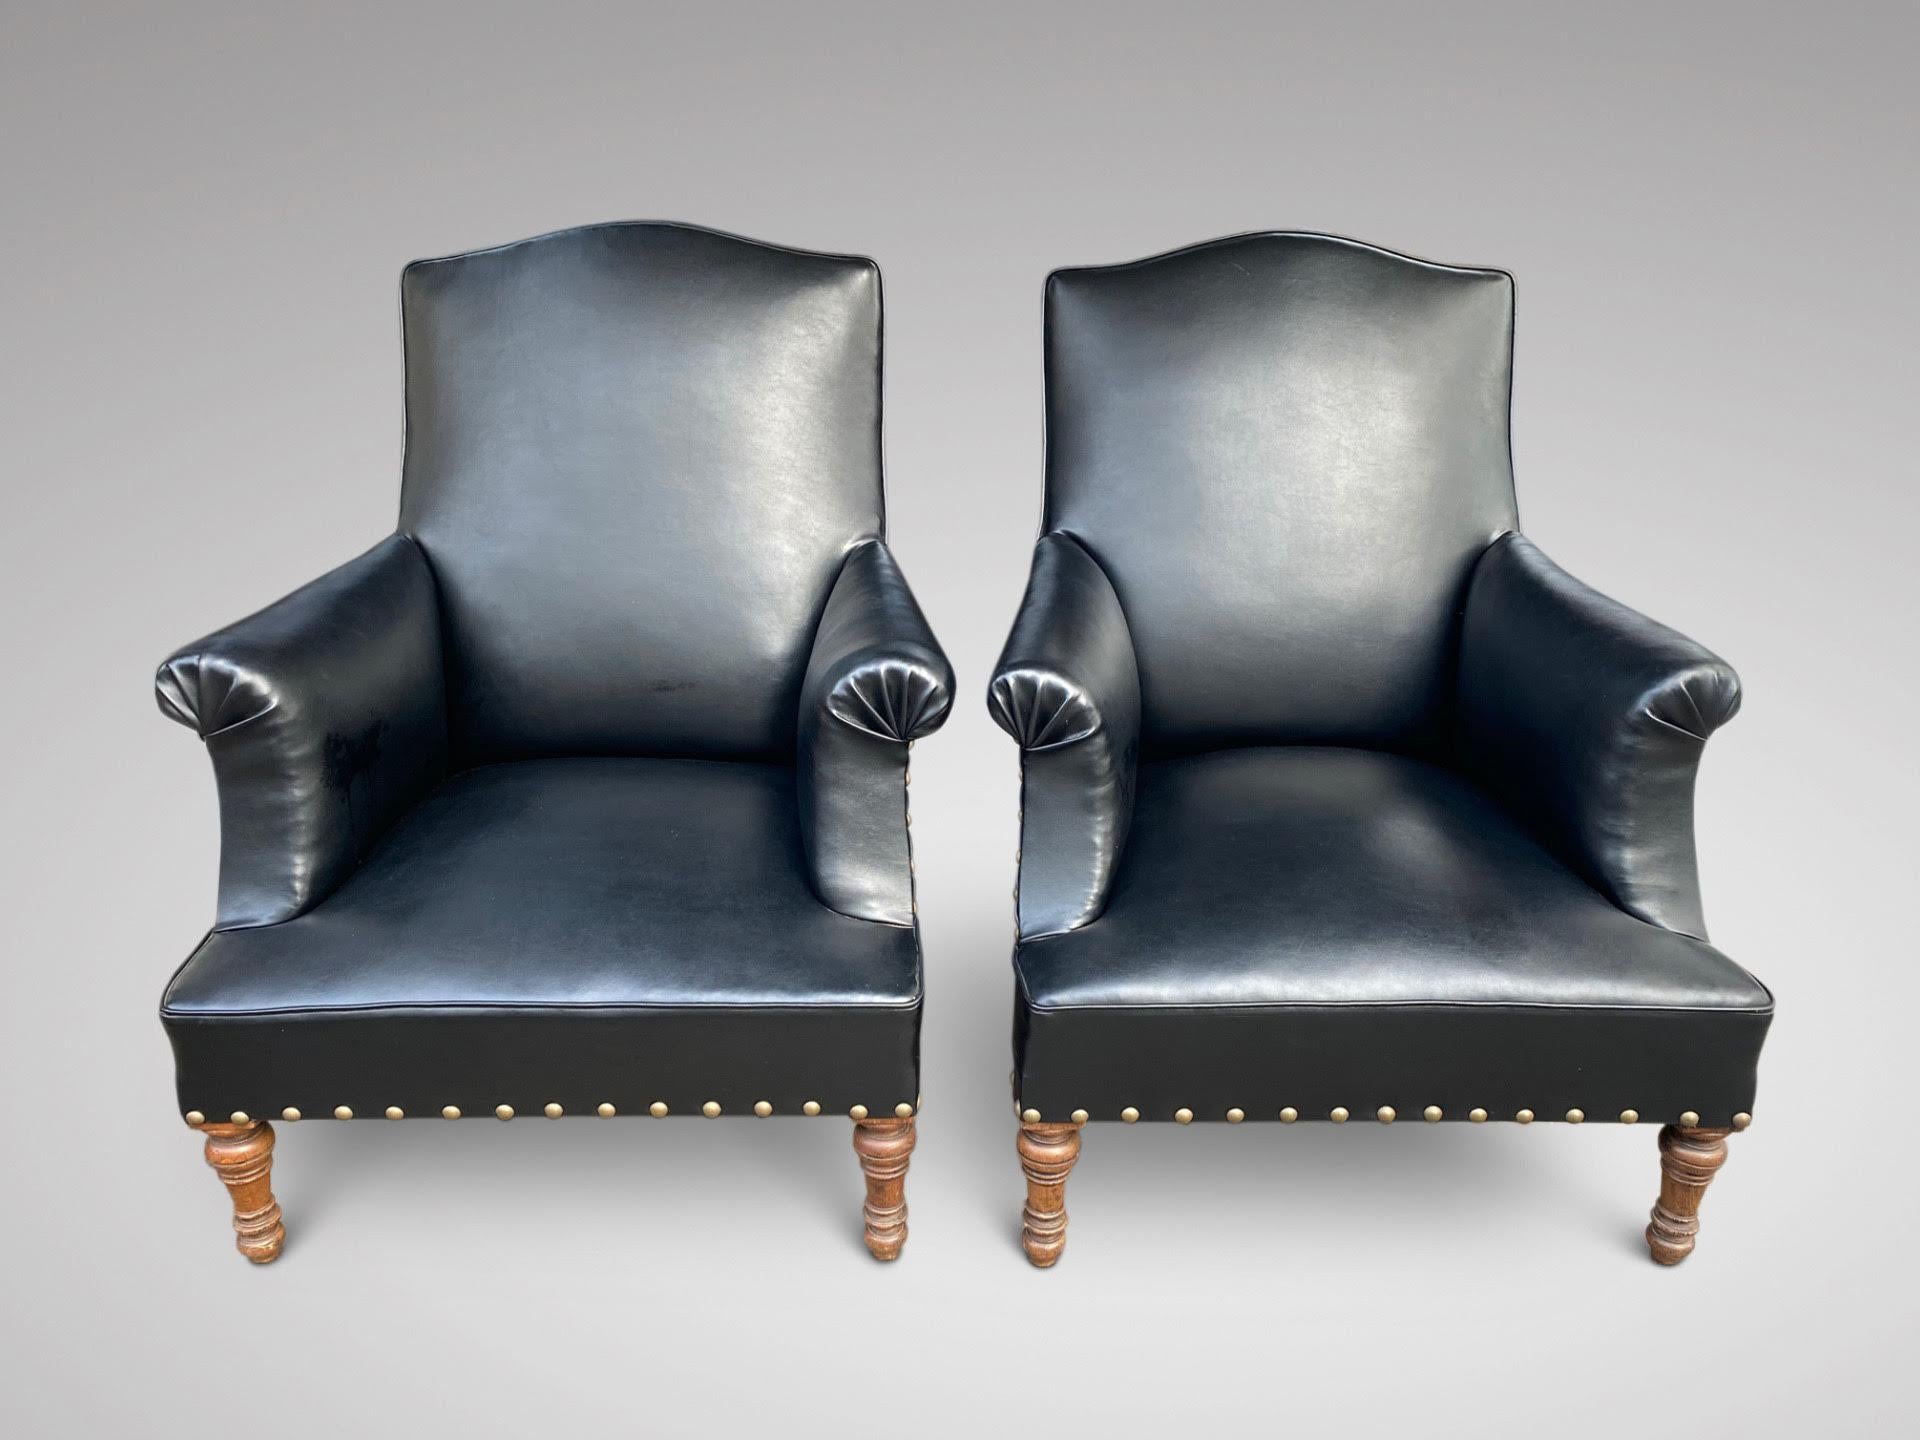 A large and very comfortable pair of Napoleon III antique French library armchairs. Quality black leather and studded on the front & back edges, standing on turned oak legs. Late 19th century. Very comfortable seating.

The dimensions are:
Height: